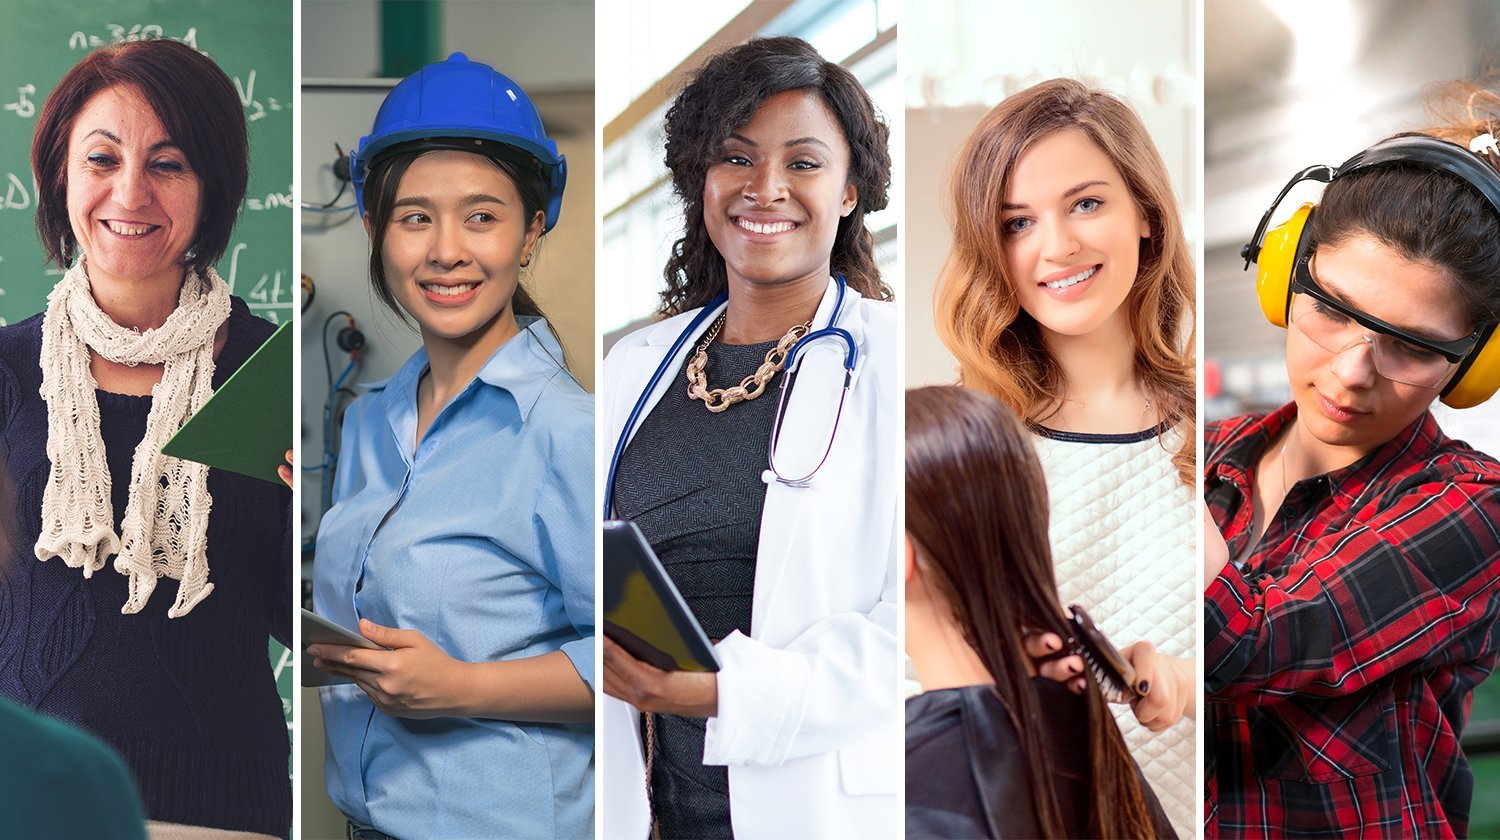 collage of 5 working women in various occupations